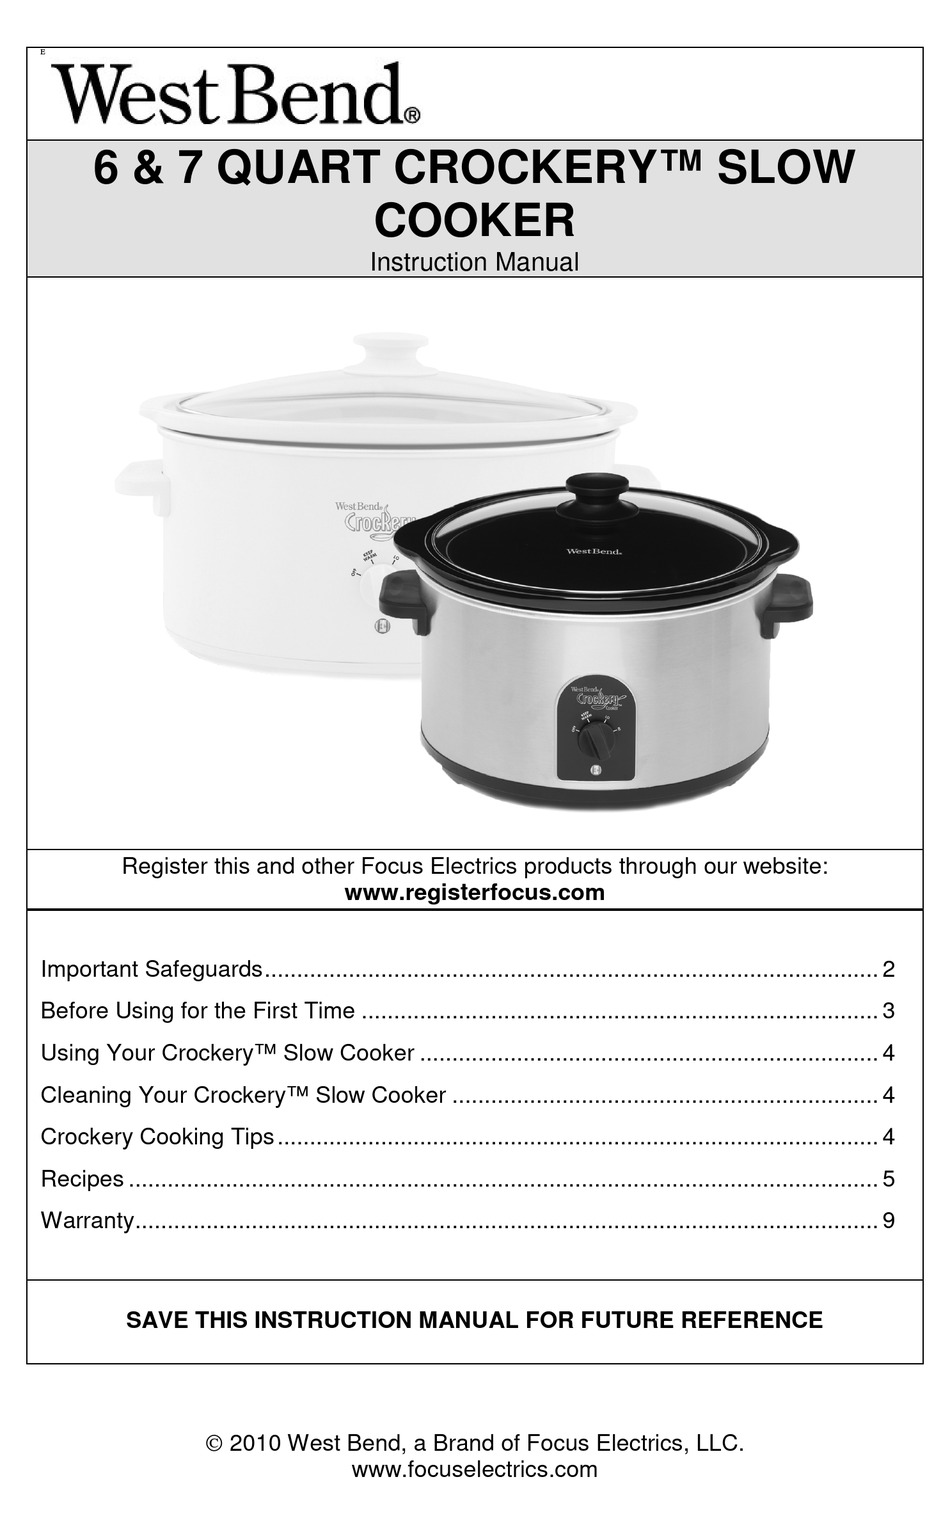 West Bend Manual Crockery Slow Cooker with Oval Ceramic Cooking Vessel and  Glass Lid Certified, 6-Quart, Silver